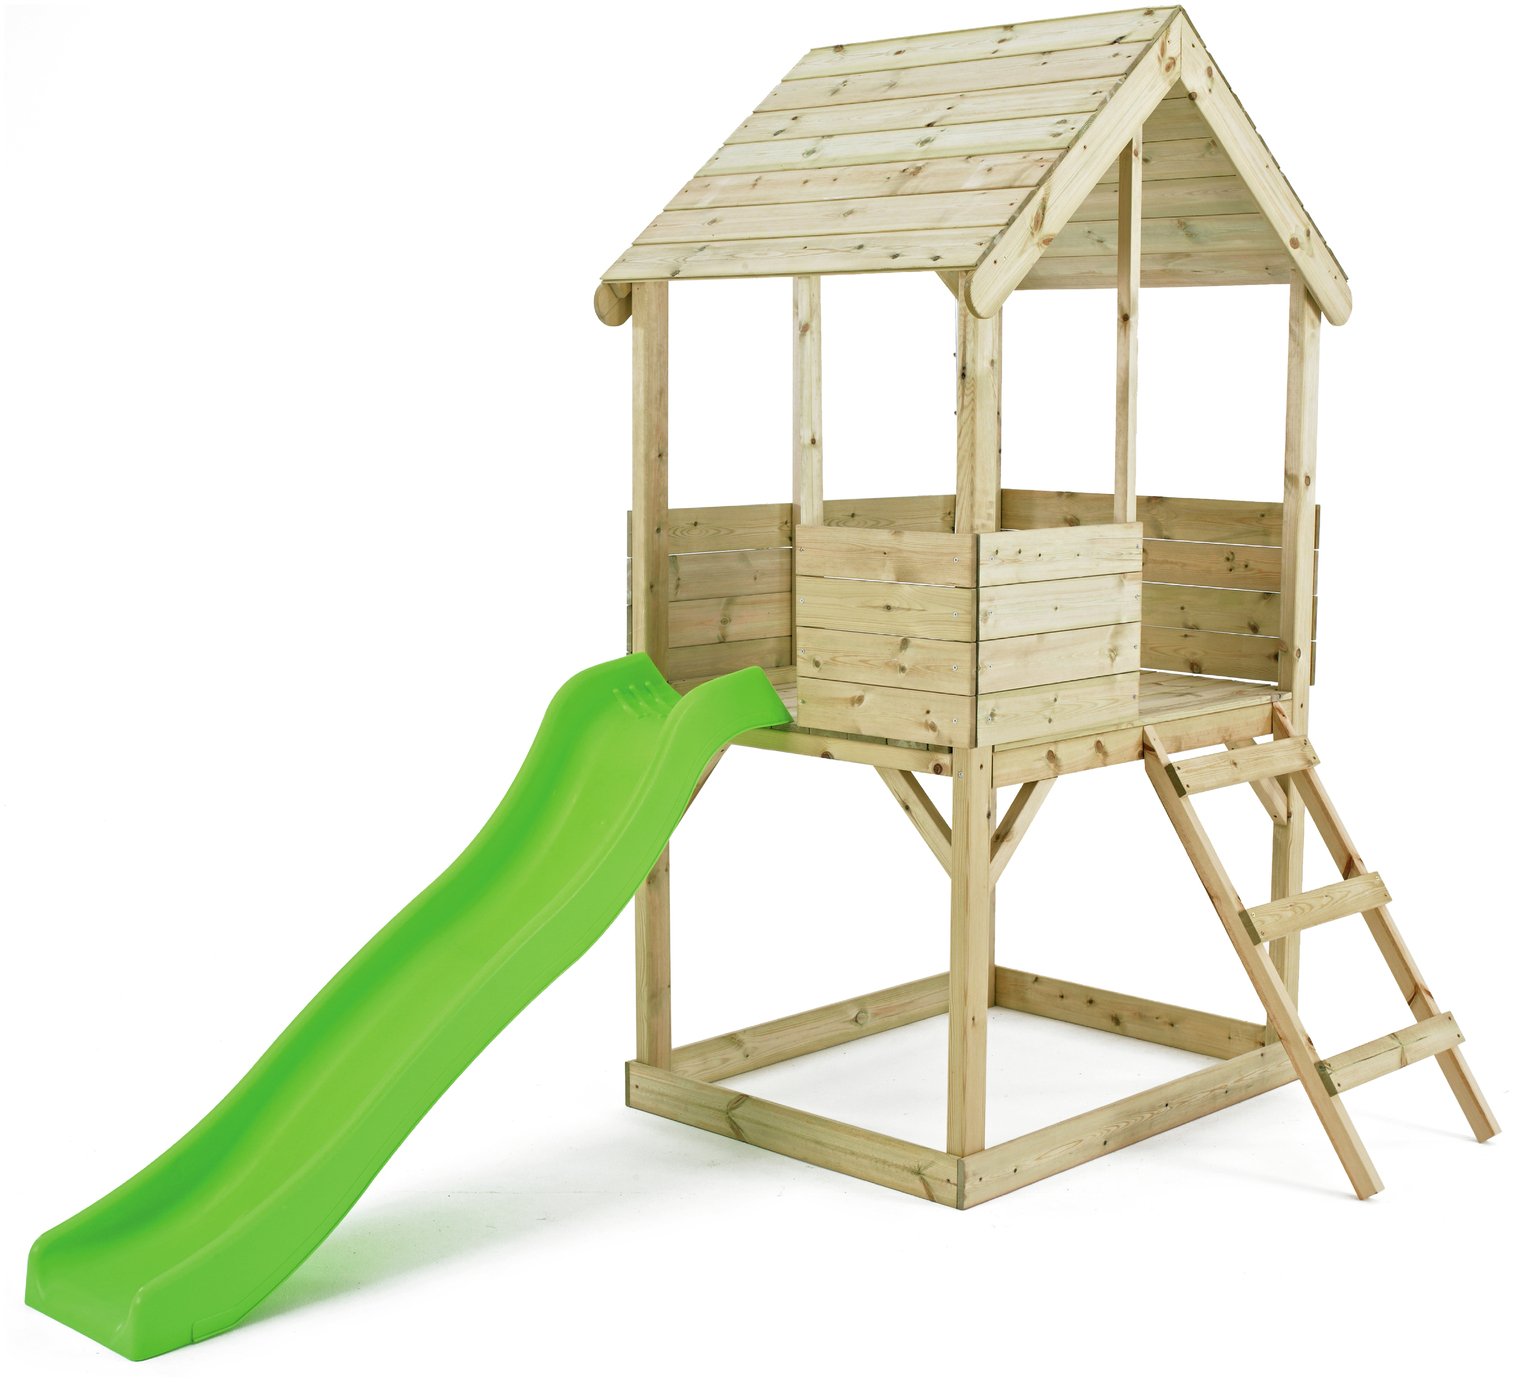 TP Wooden Multiplay Playhouse Review